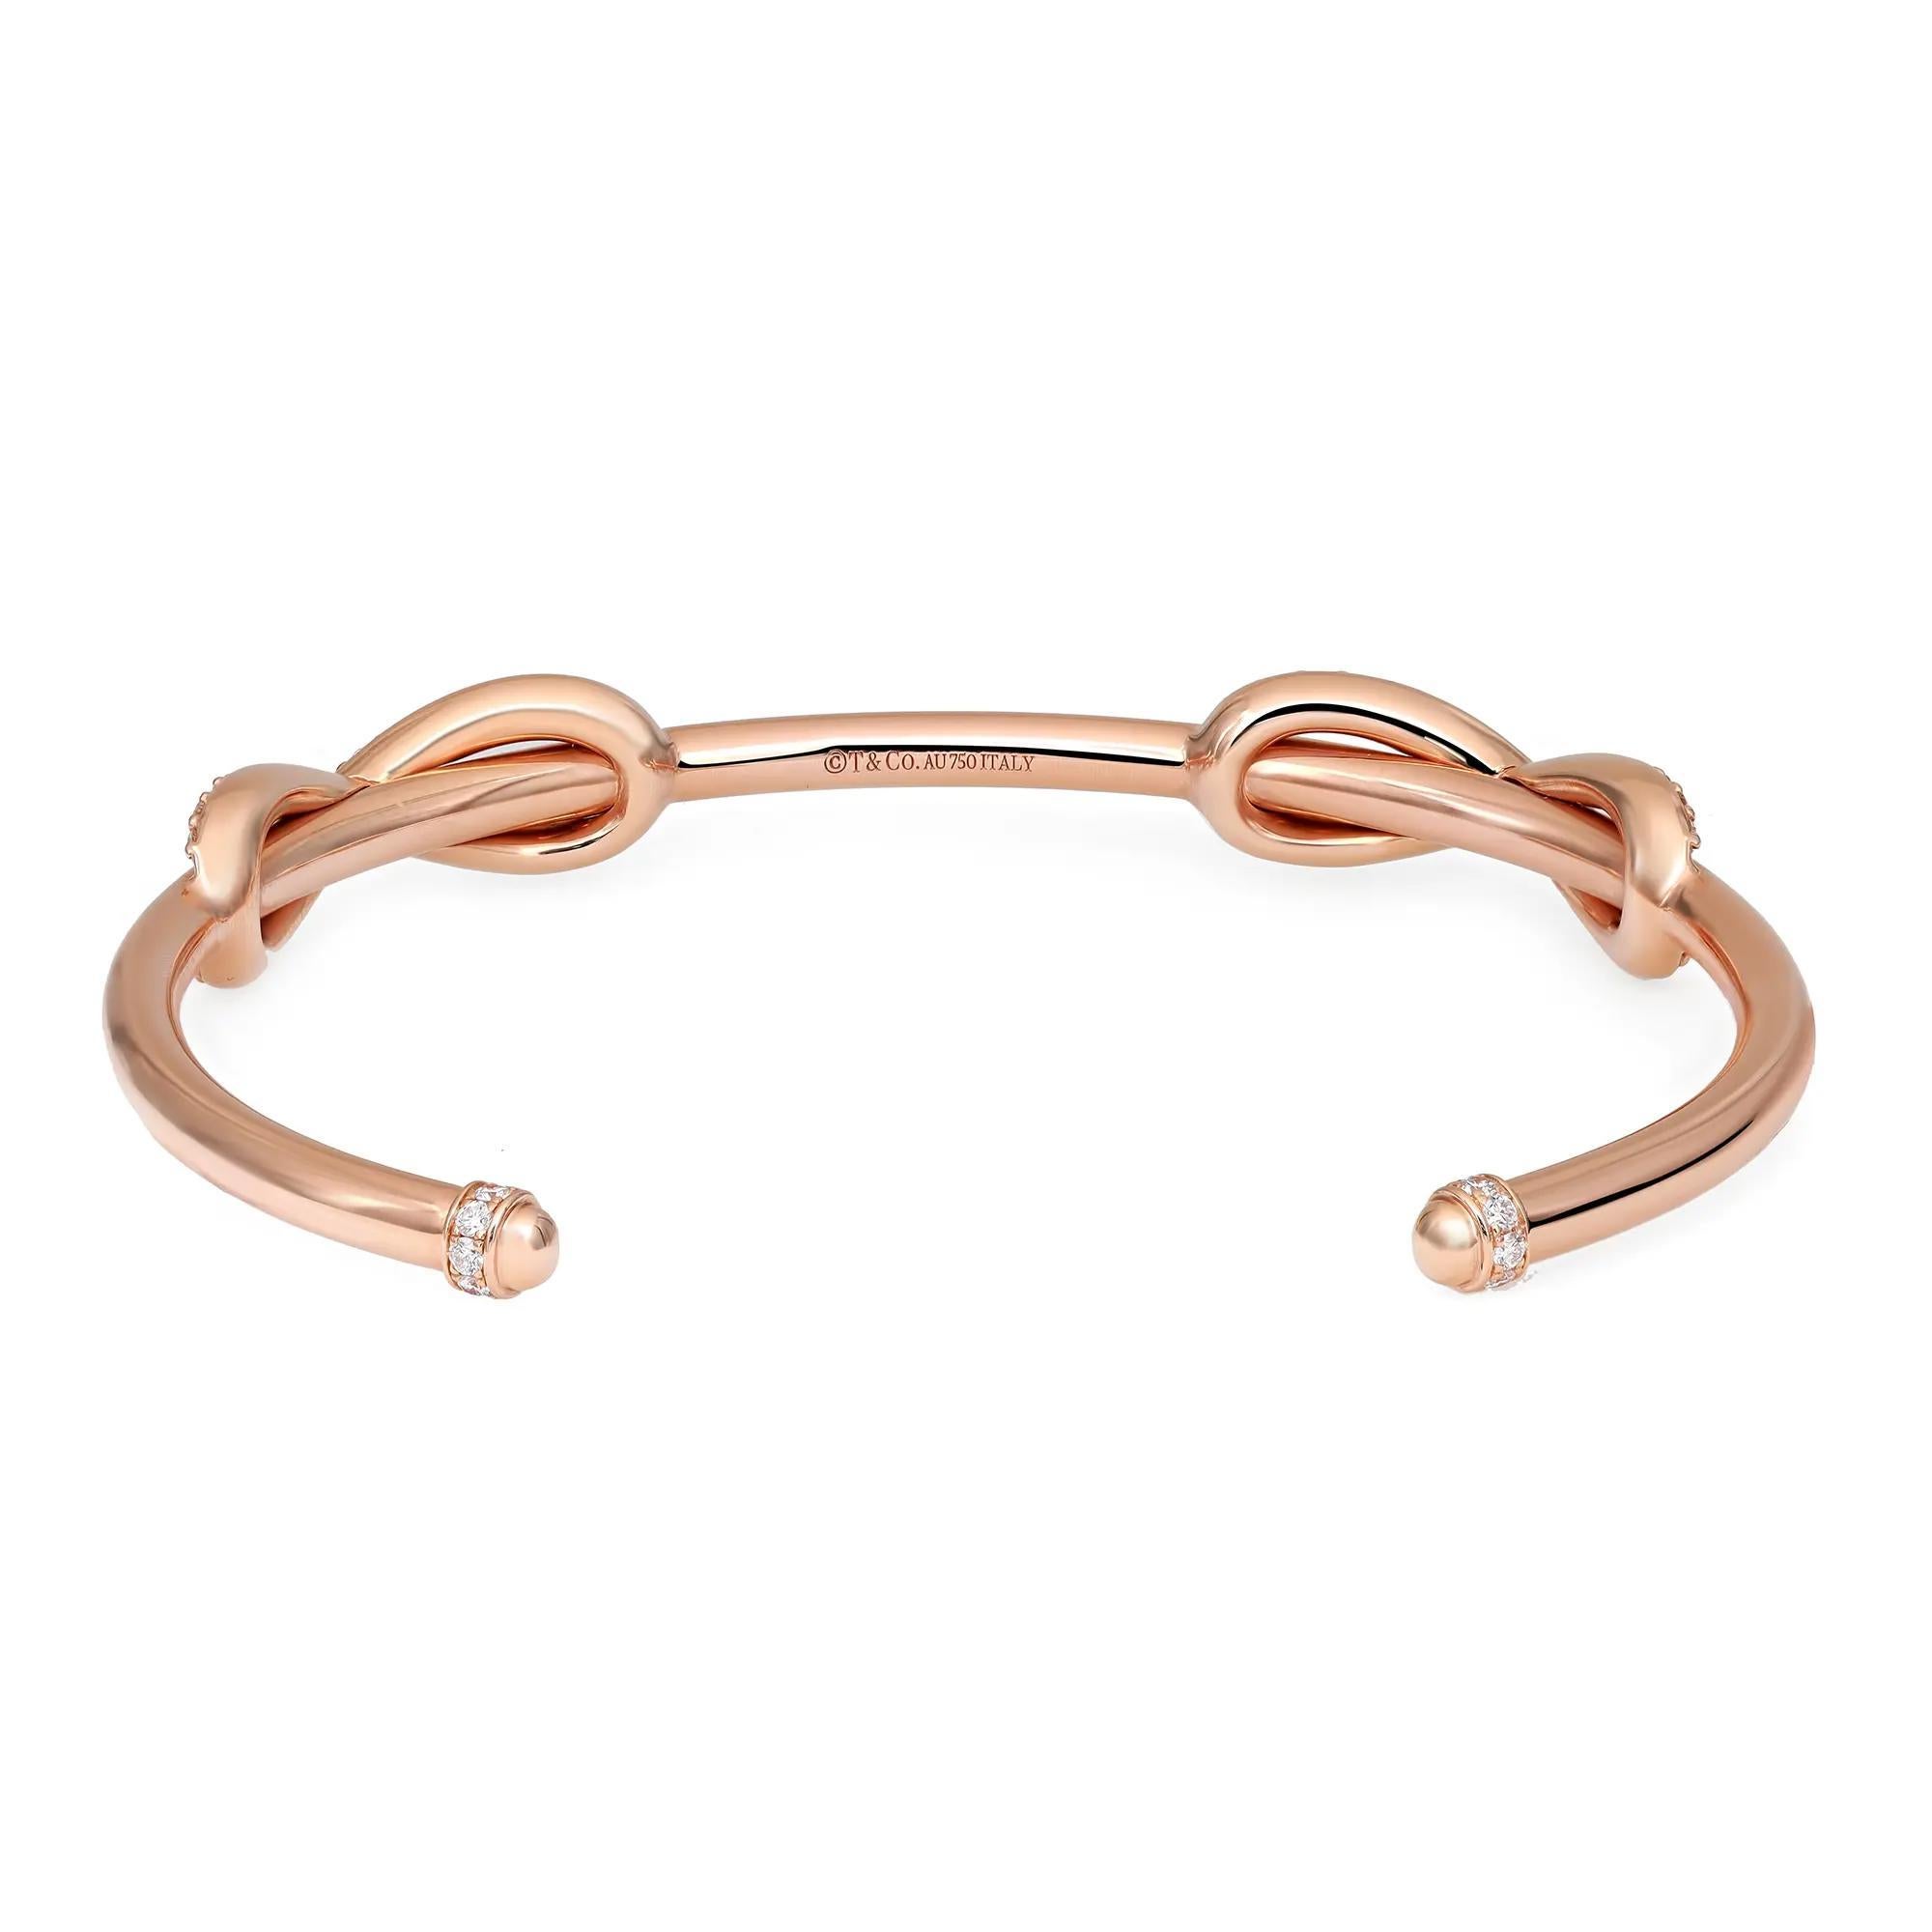 This gorgeous Tiffany & Co. cuff bracelet is crafted in solid 18K rose gold. It features a double infinity design encrusted with bright white round brilliant cut diamonds with exceptional brilliance. This bracelet has a wonderful highly polished